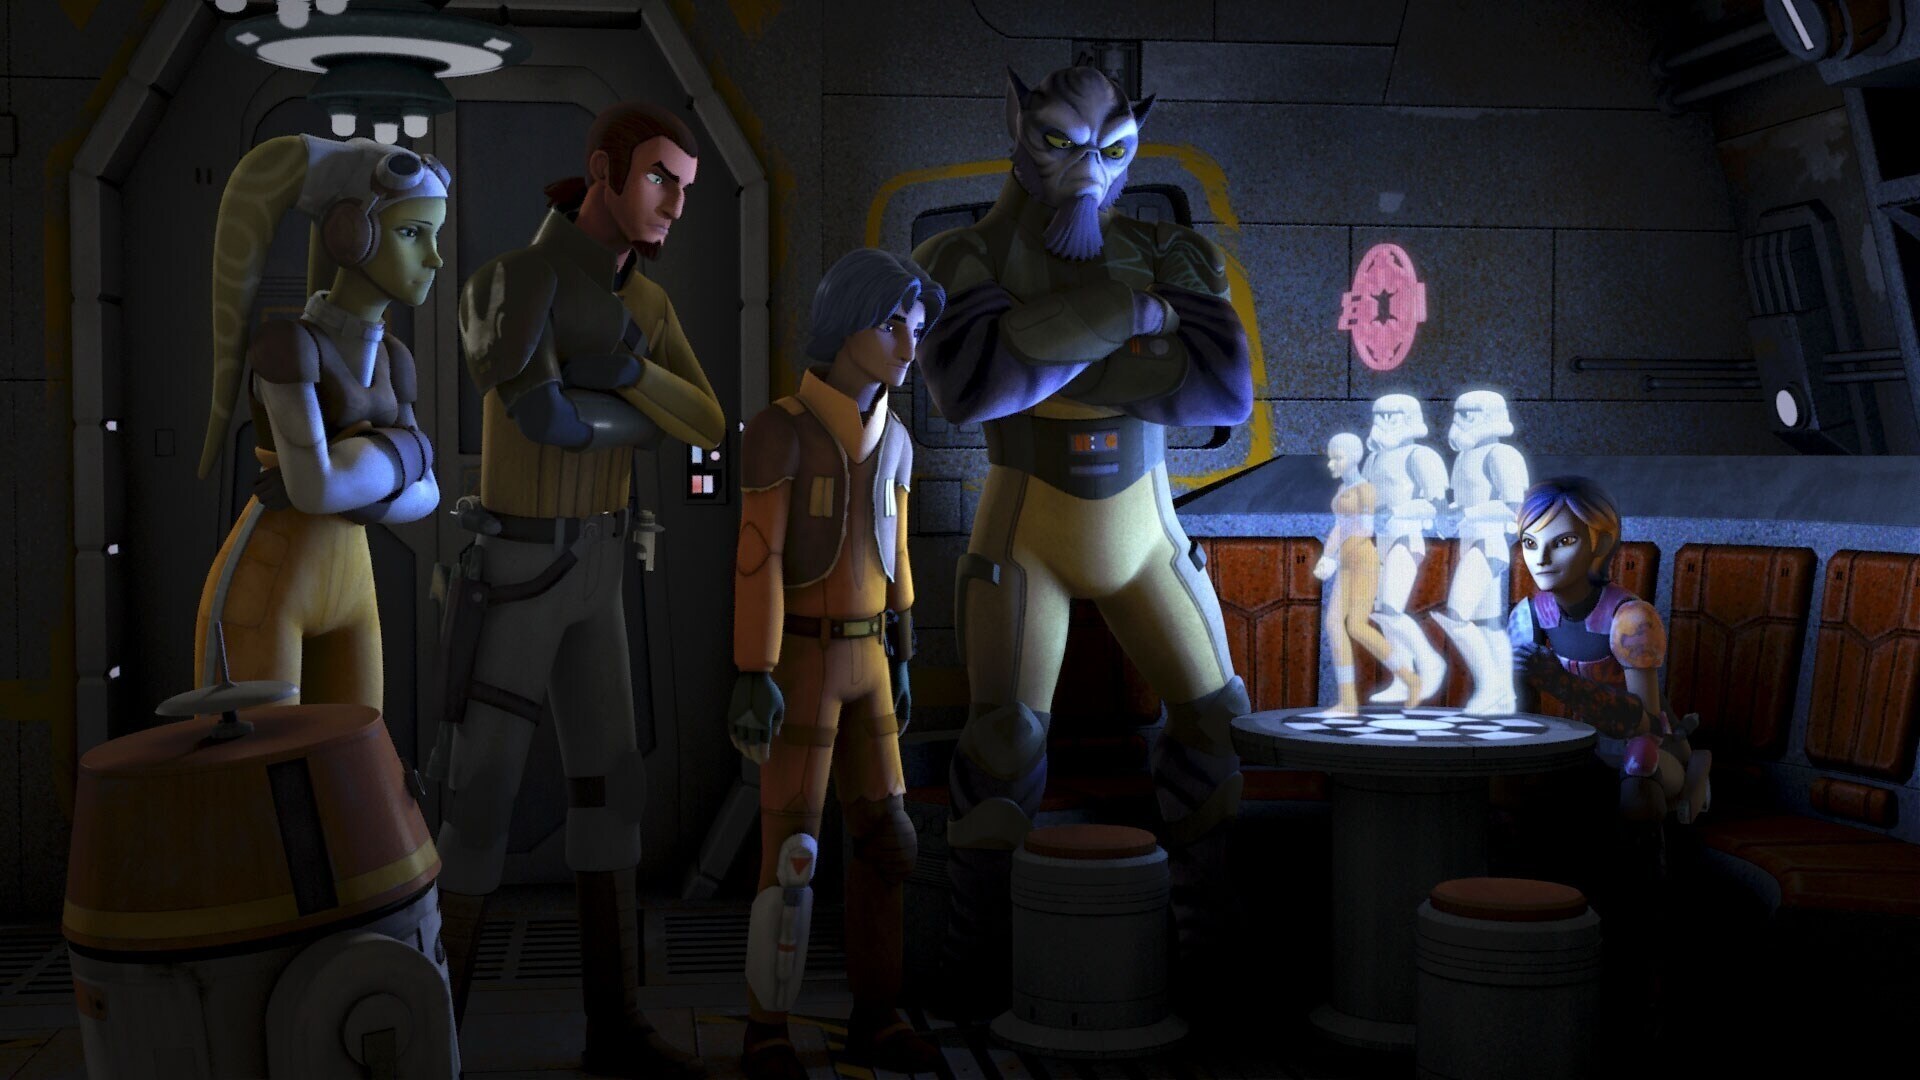 The Ghost crew looking at a hologram of Jedi Master Luminary Unduli in Imperial custody